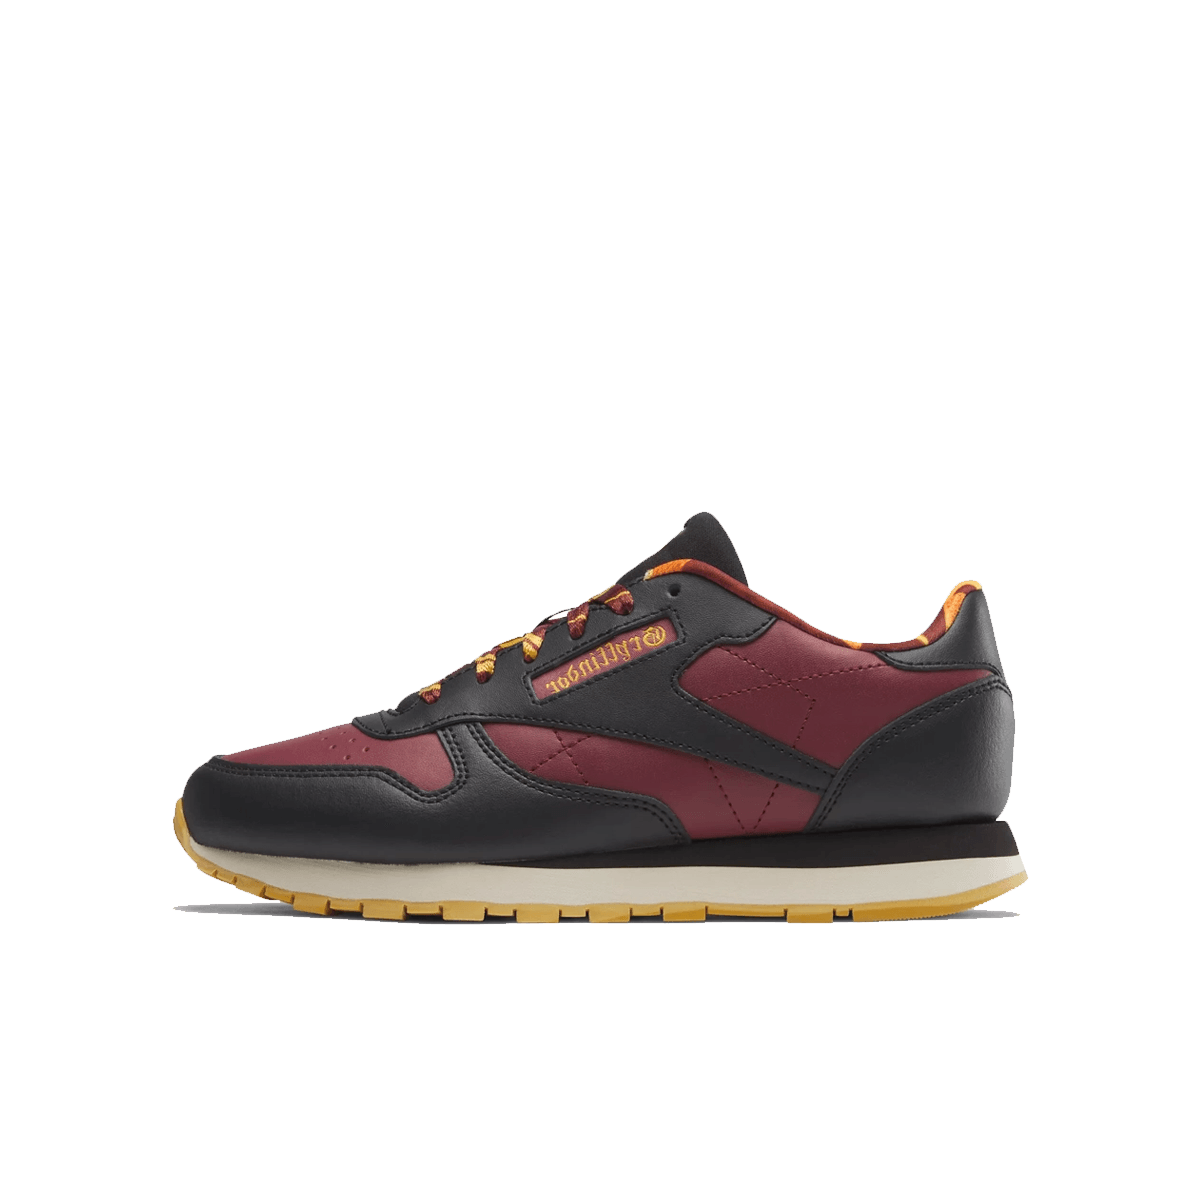 Harry Potter x Reebok Classic Leather GS 'Gryffindor' 100202575